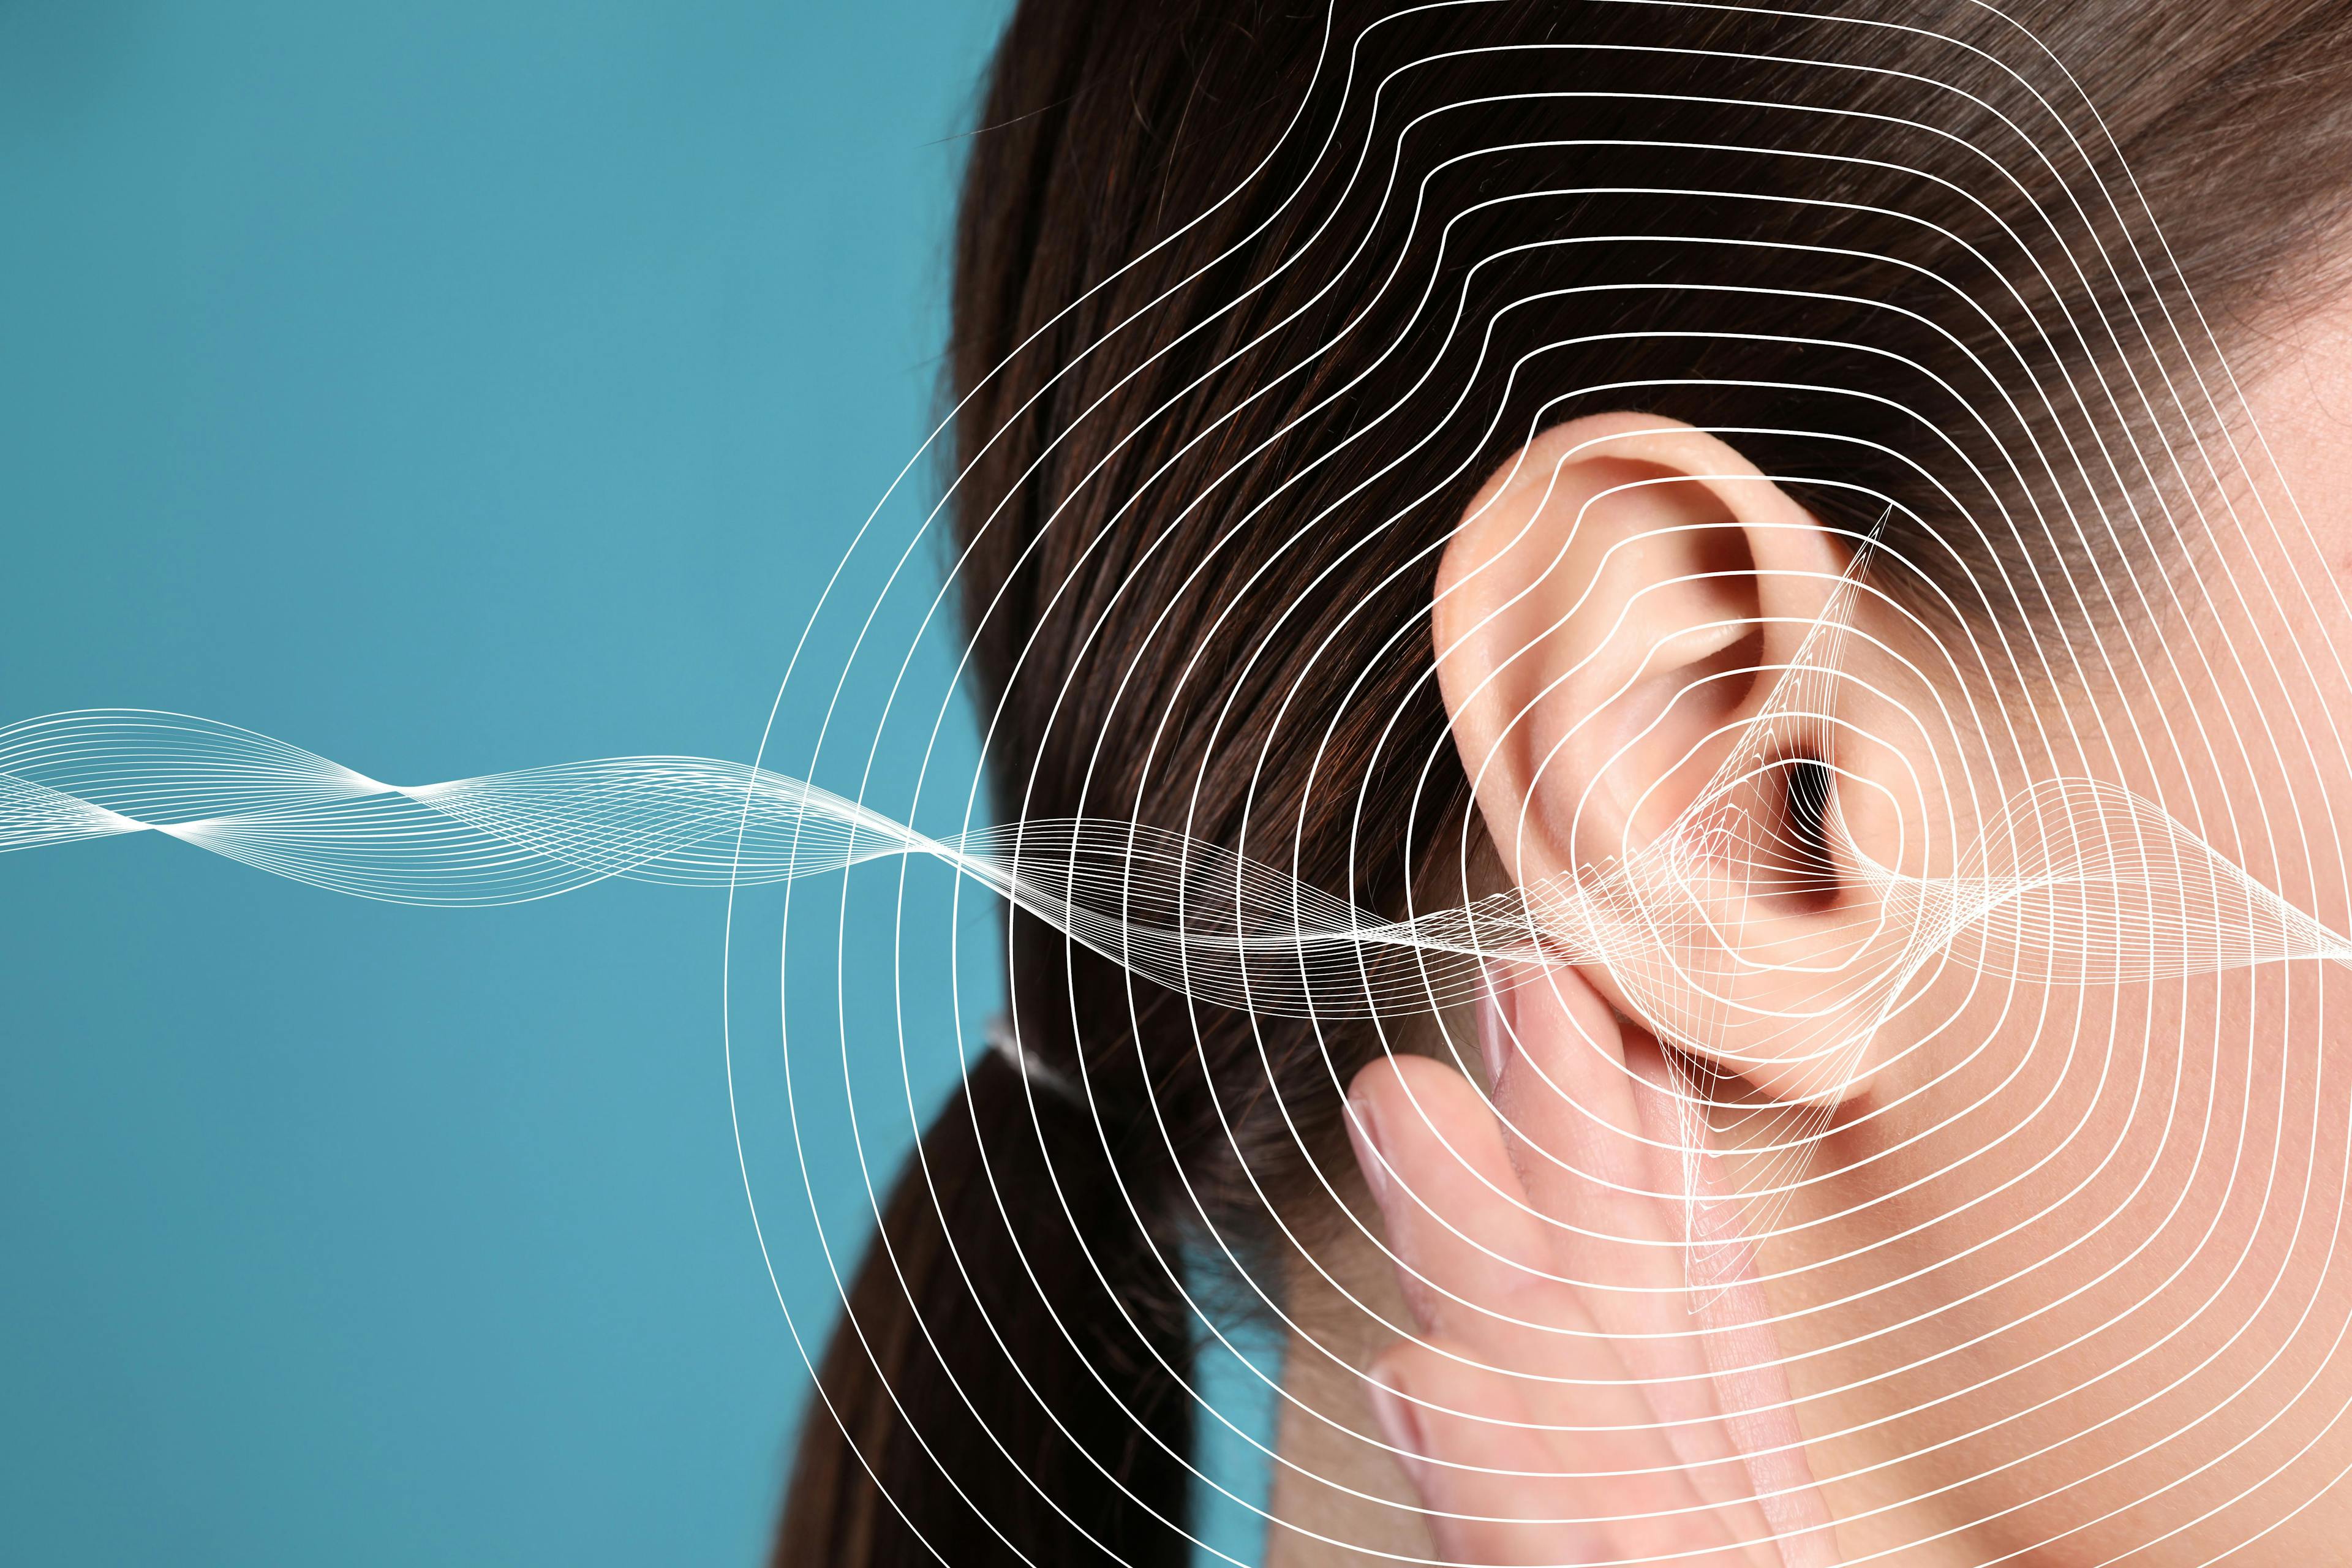 Hearing loss concept. Woman and sound waves illustration on light blue background, closeup: © New Africa - stock.adobe.com